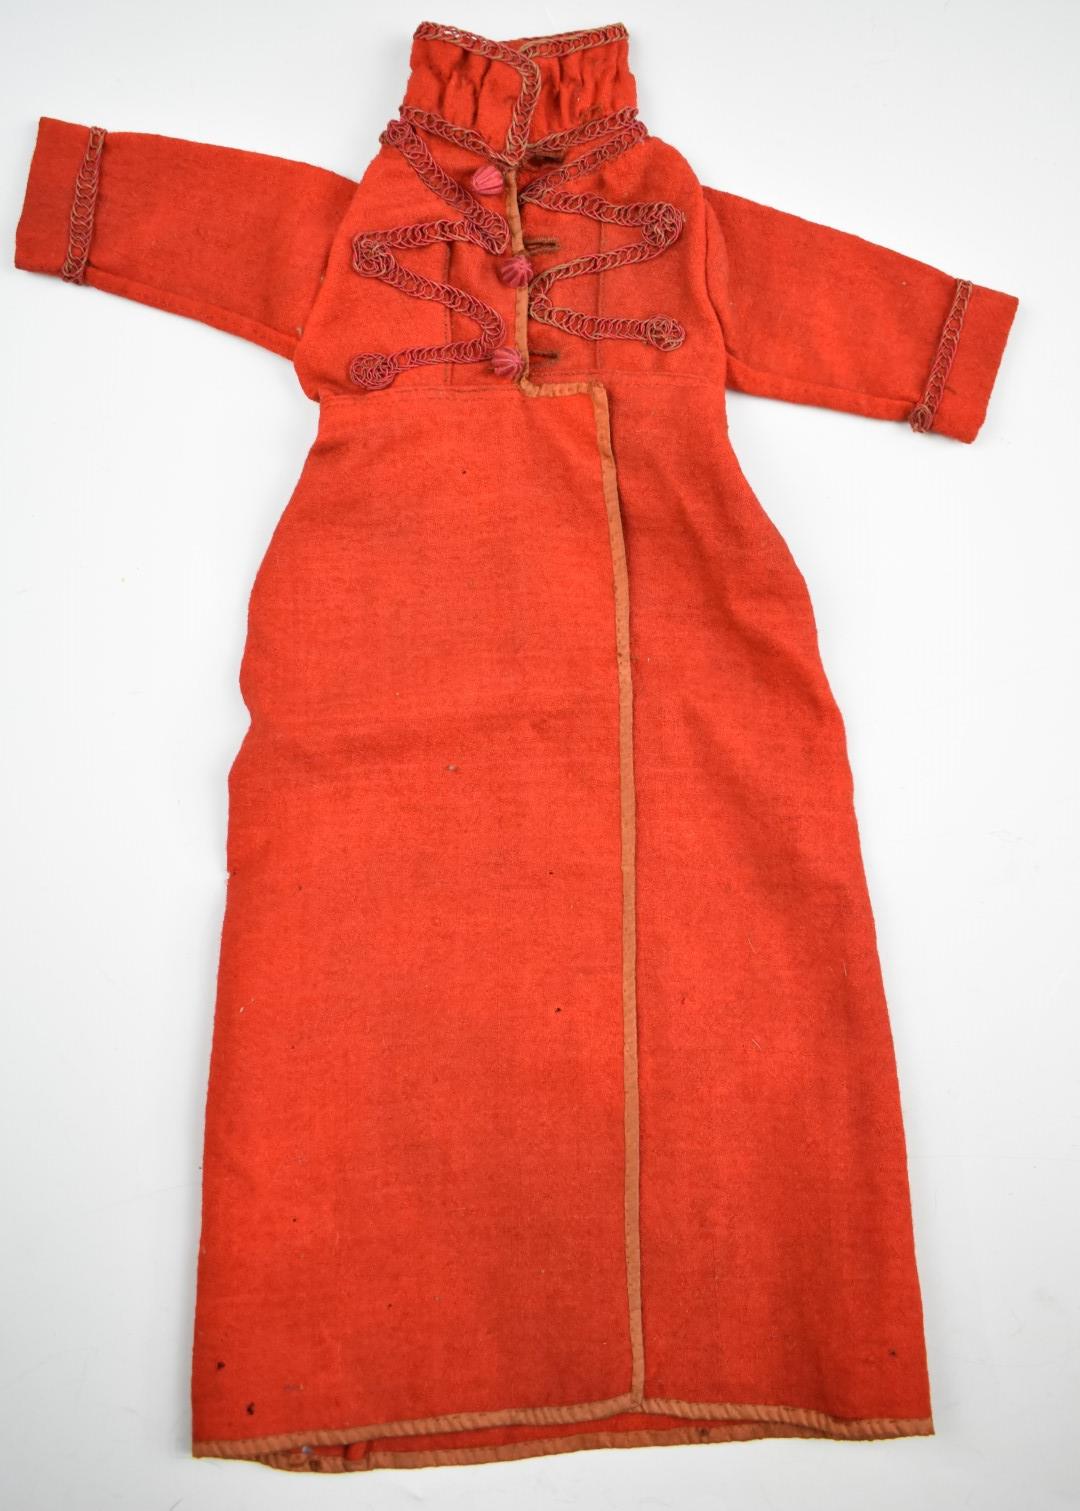 18th / 19thC woollen doll's dress with embroidered decoration and cloth buttons, length 45cm - Image 2 of 6